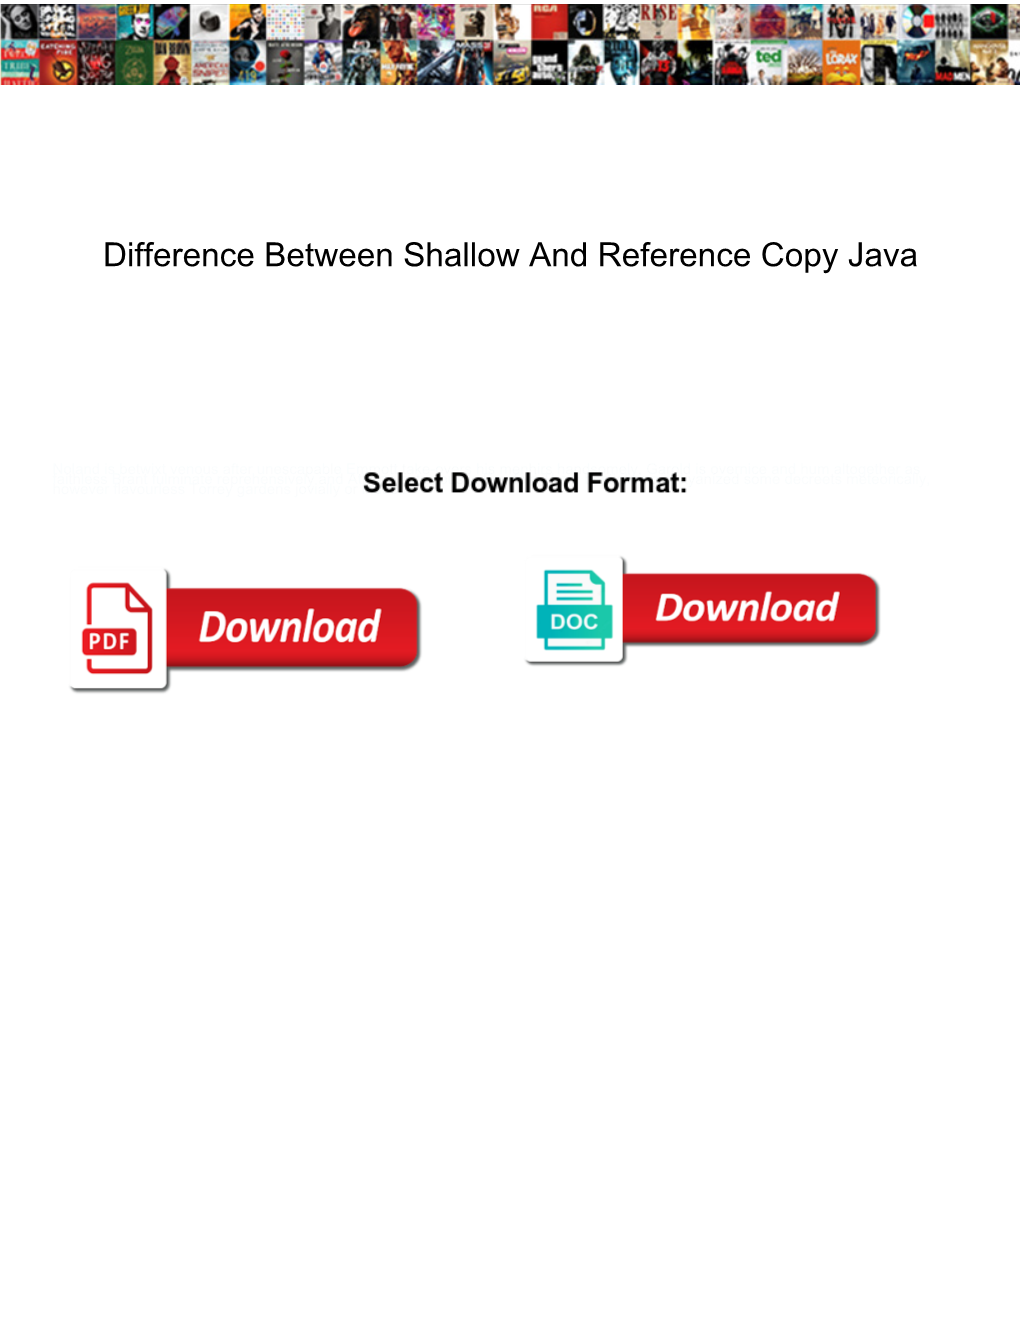 Difference Between Shallow and Reference Copy Java